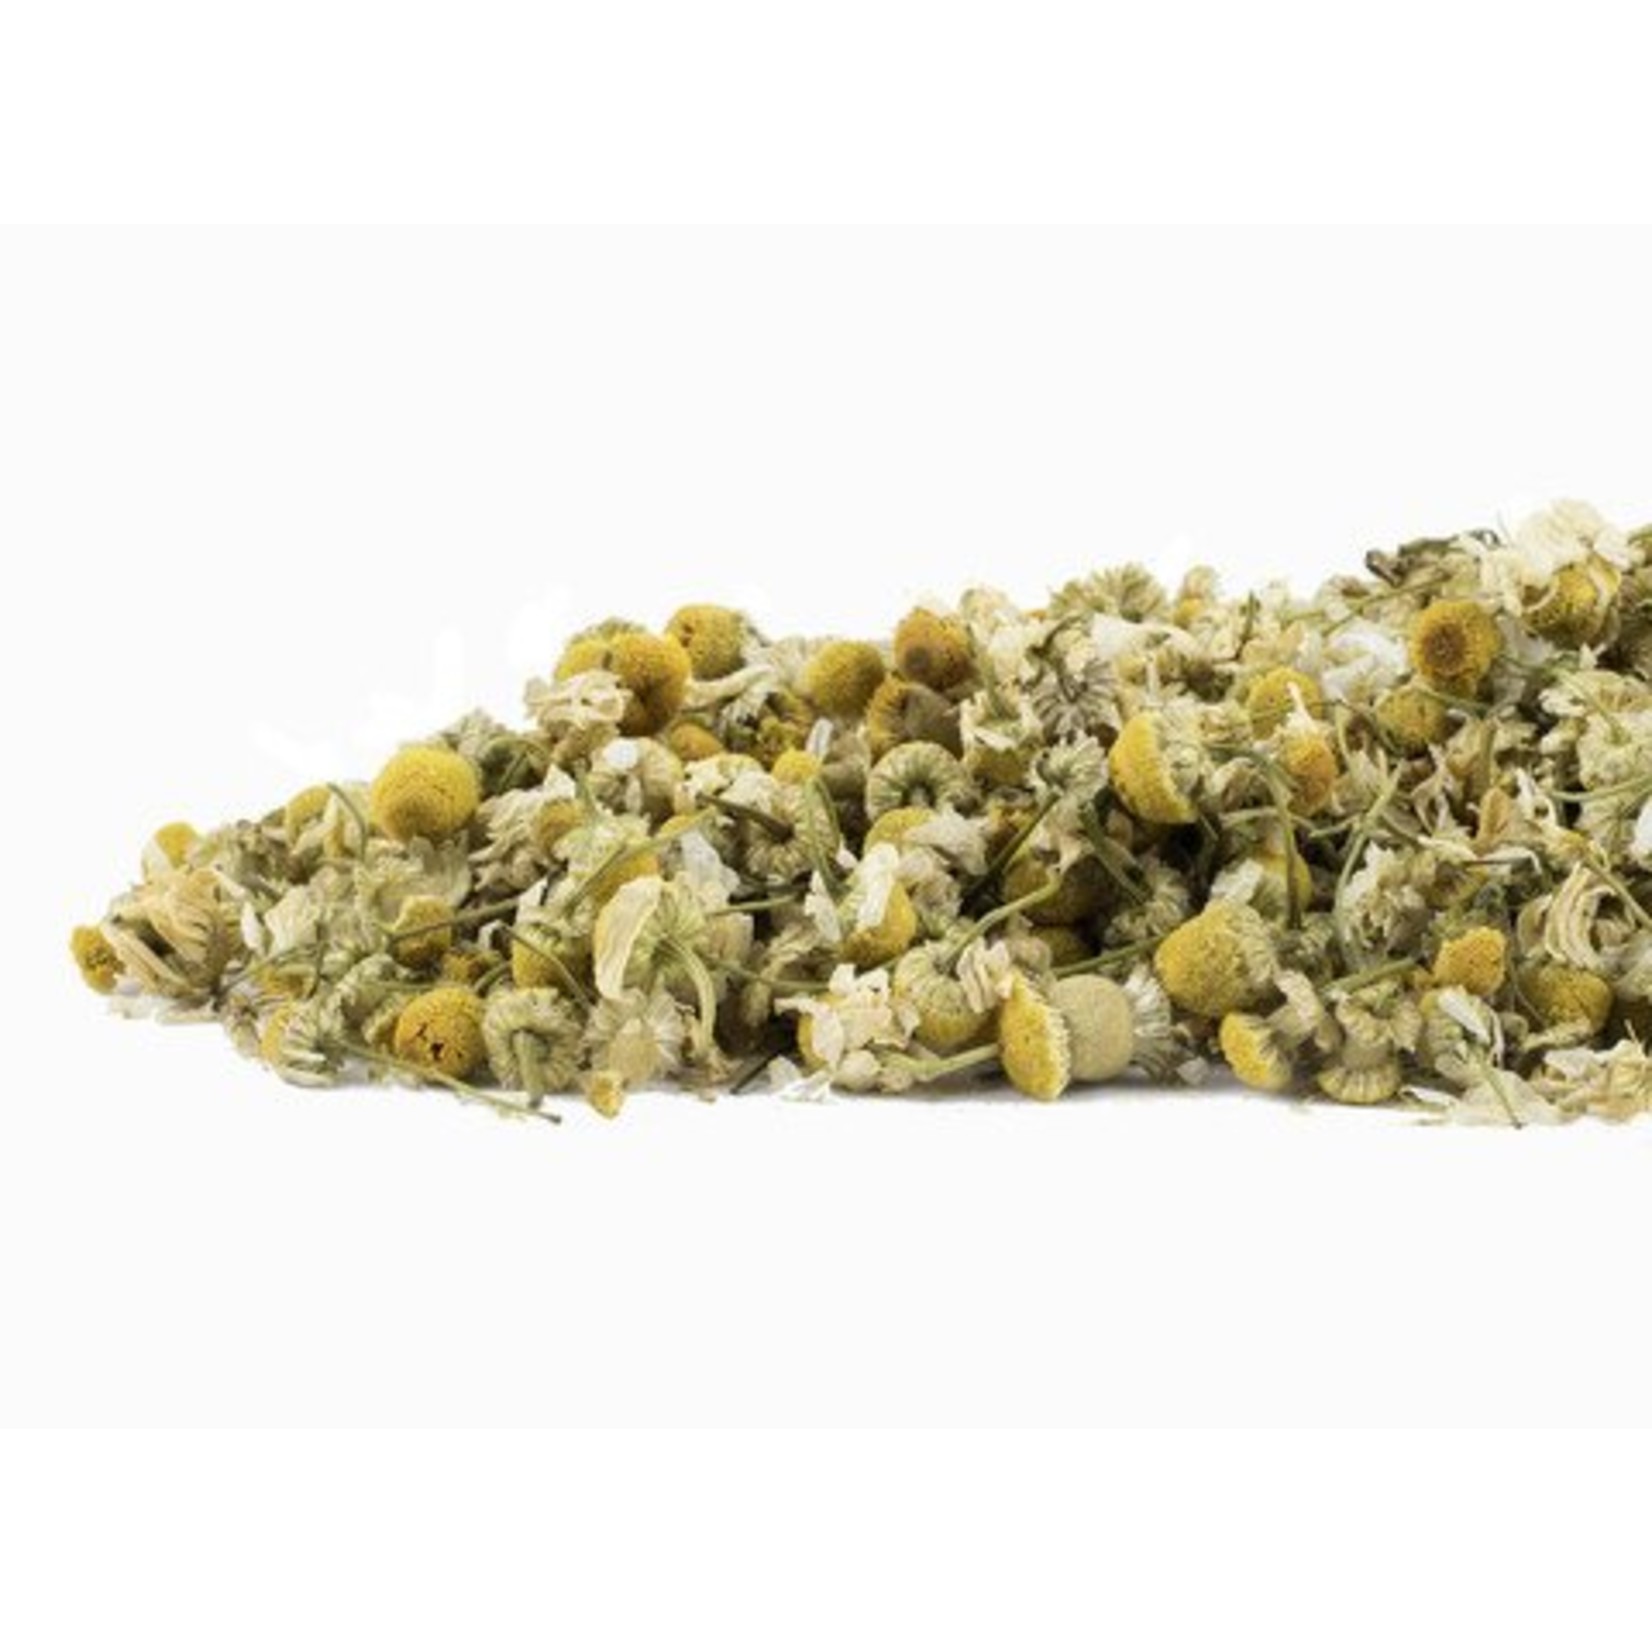 Organic Chamomile Flower - Sold Per Ounce